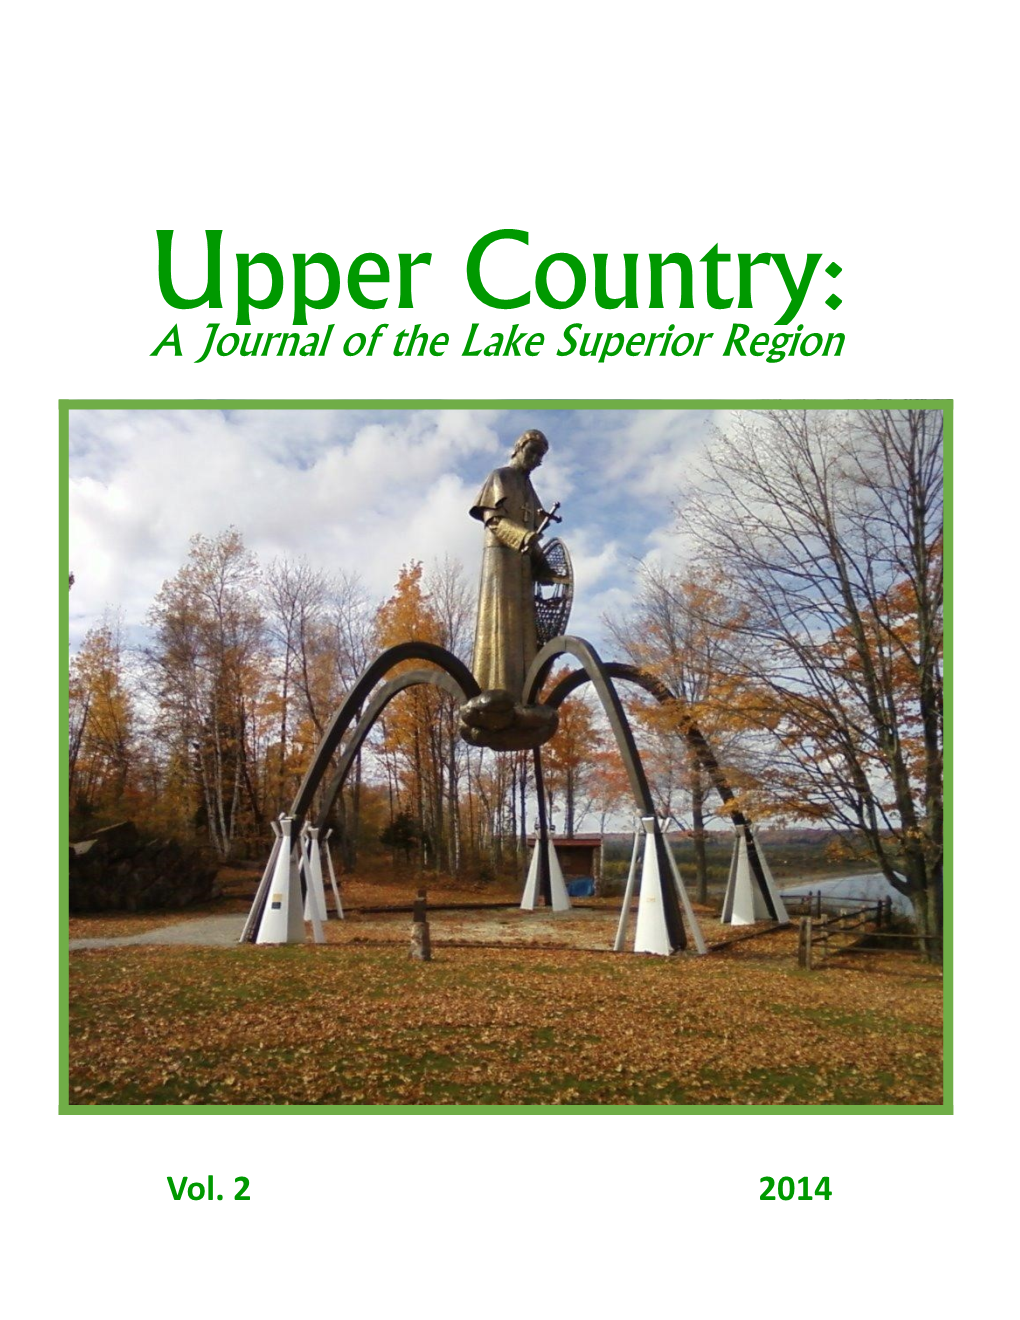 A Journal of the Lake Superior Region